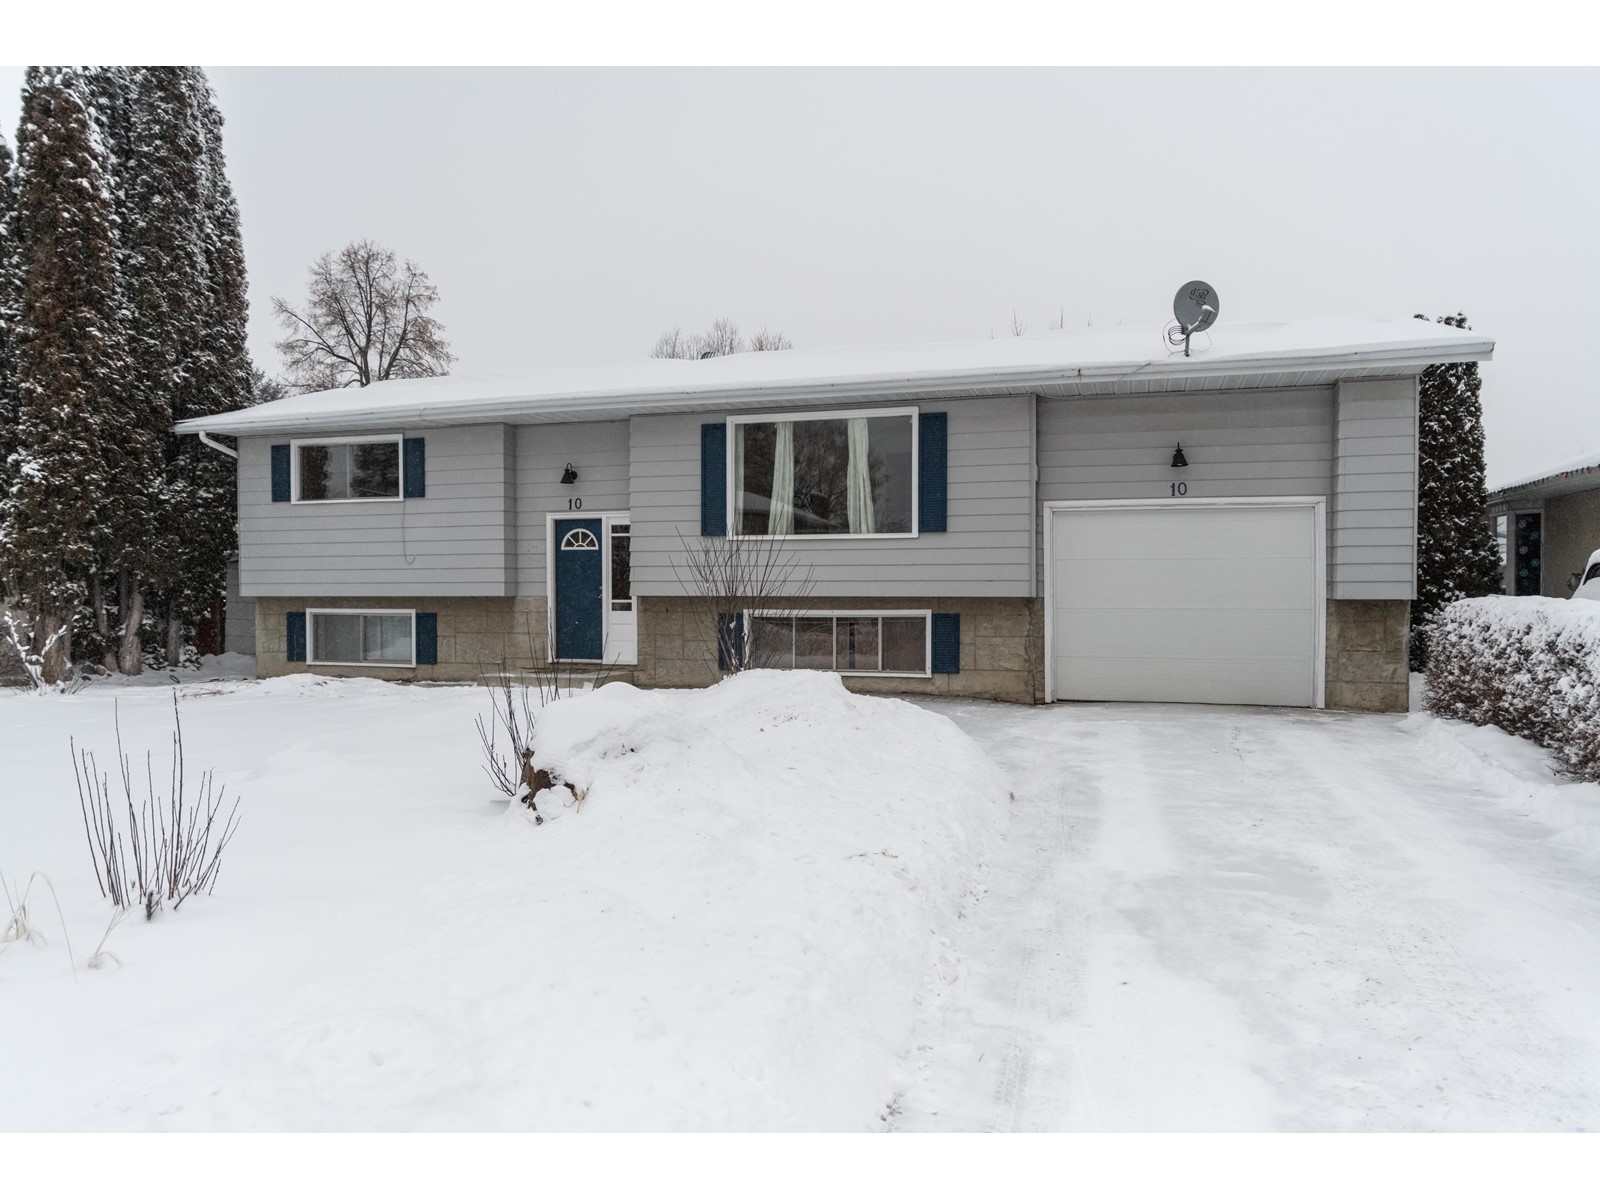 House at 10 BLAIRMORE PL